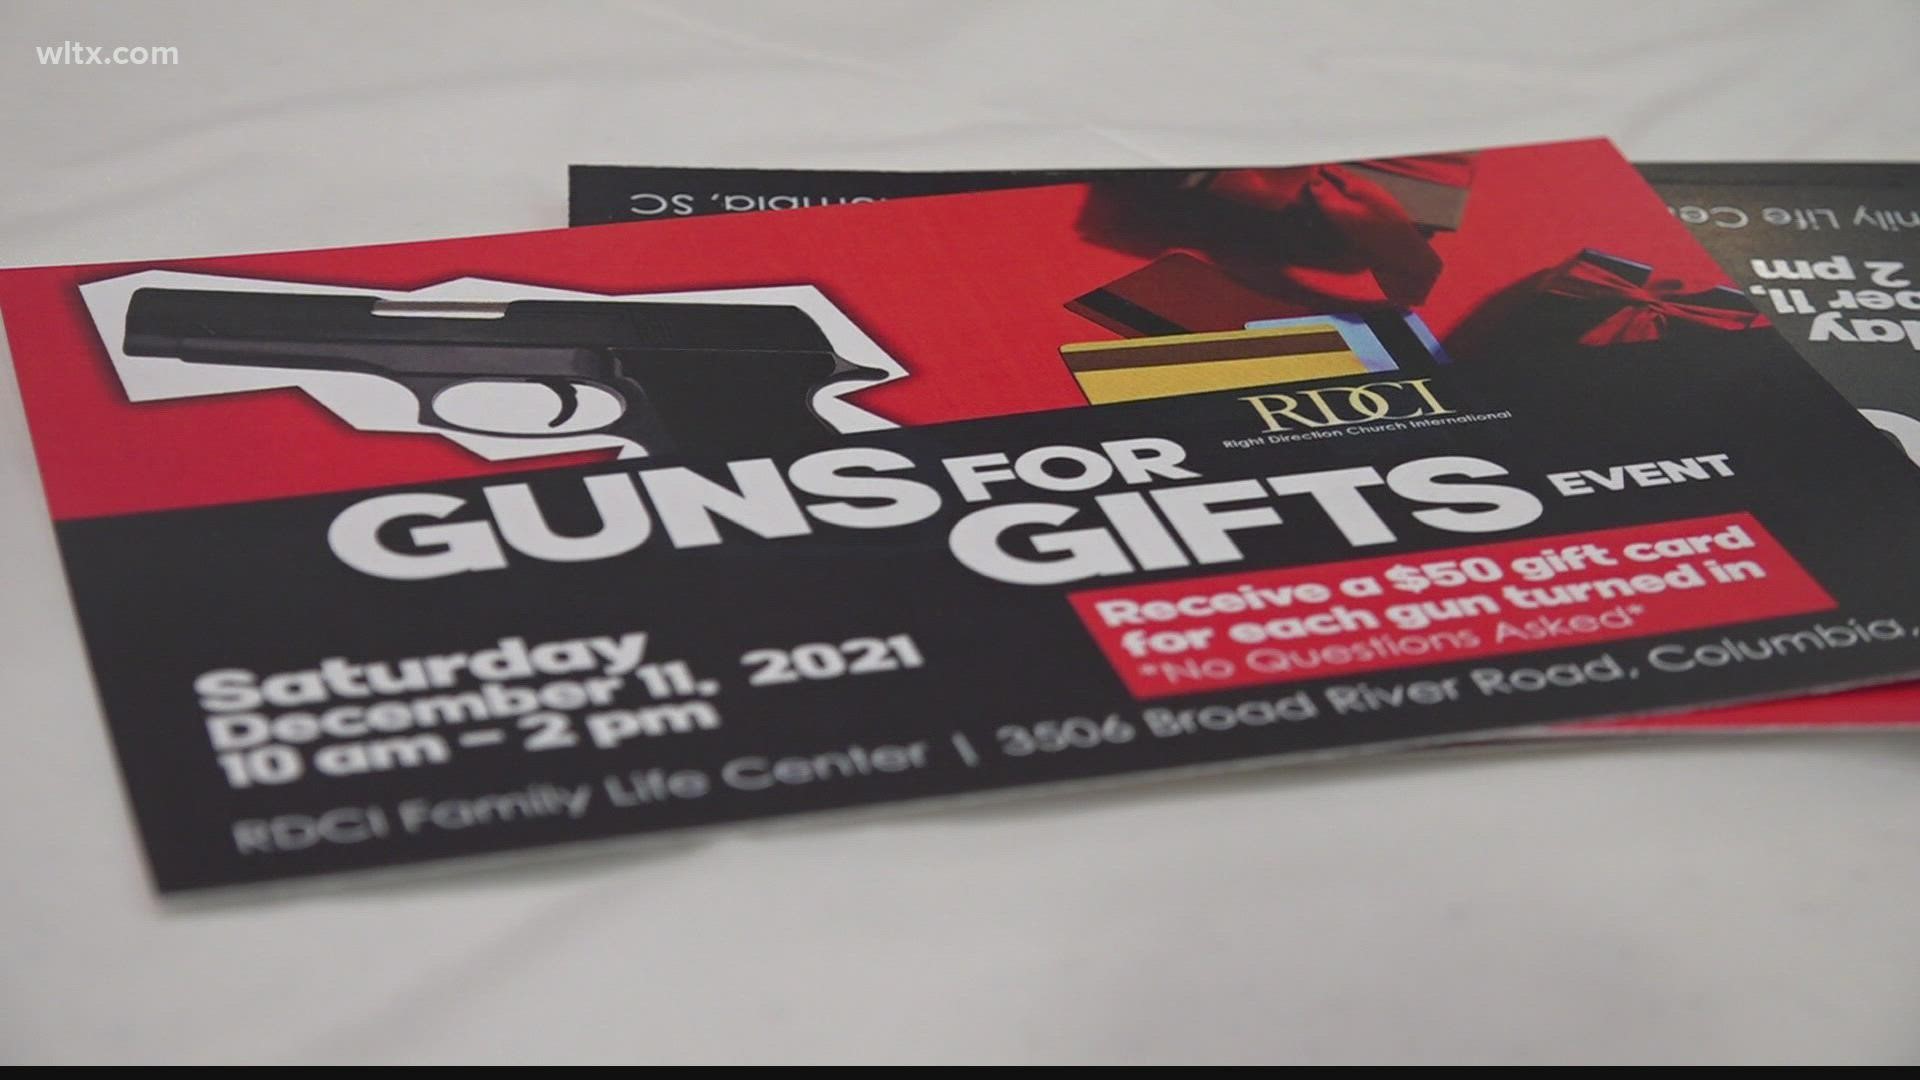 'Guns for gifts' allowed people in Richland County to surrender their guns to deputies, no questions asked, for $50 gift cards.